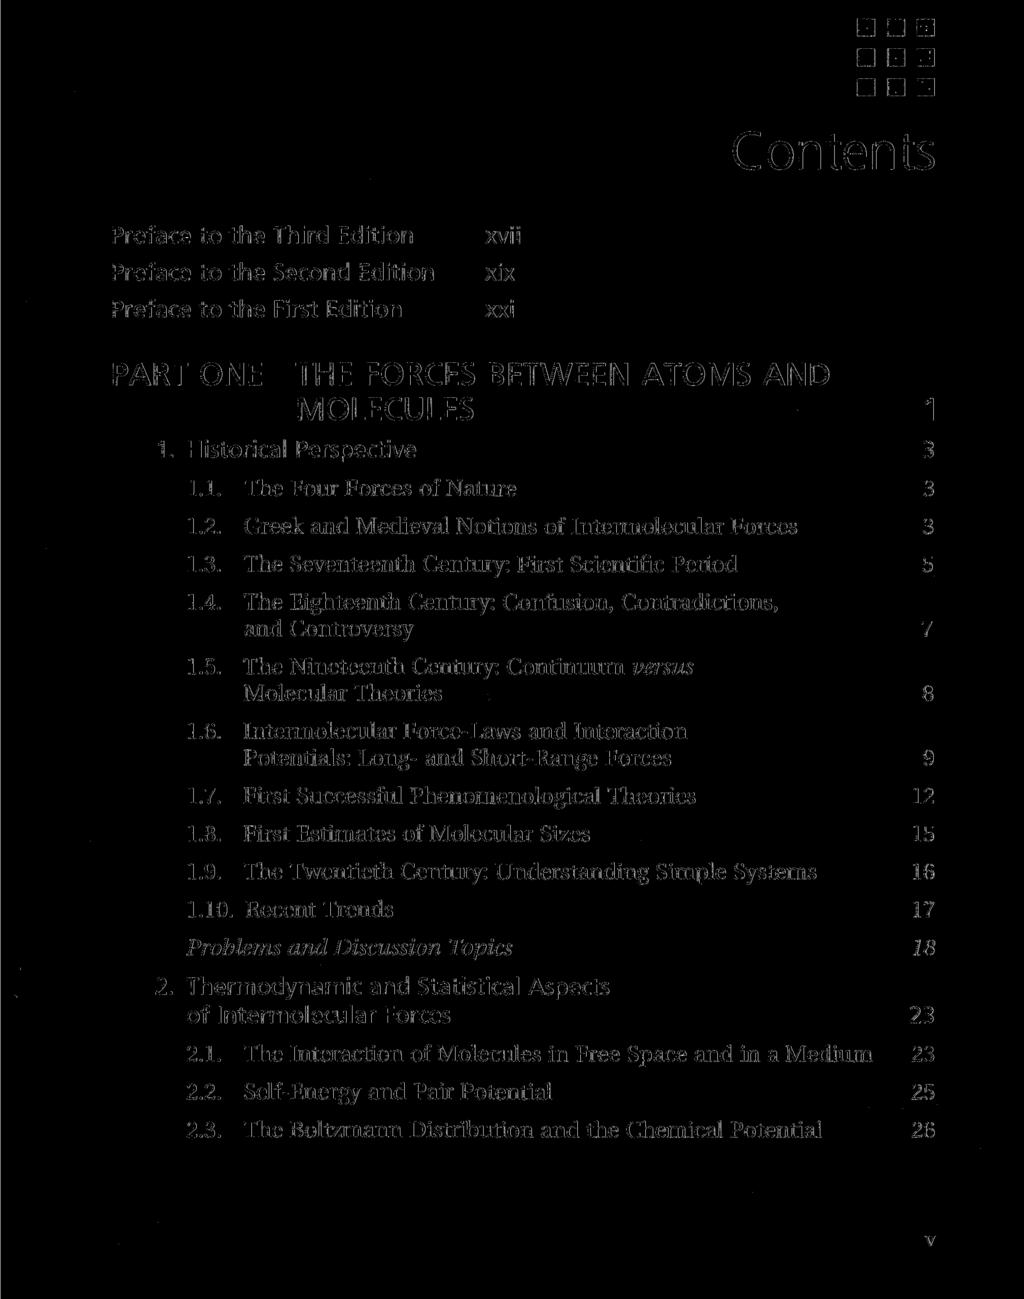 Contents Preface to the Third Edition Preface to the Second Edition Preface to the First Edition xvii xix xxi PART ONE THE FORCES BETWEEN ATOMS AND MOLECULES 1 1. Historical Perspective 3 1.1. The Four Forces of Nature 3 1.